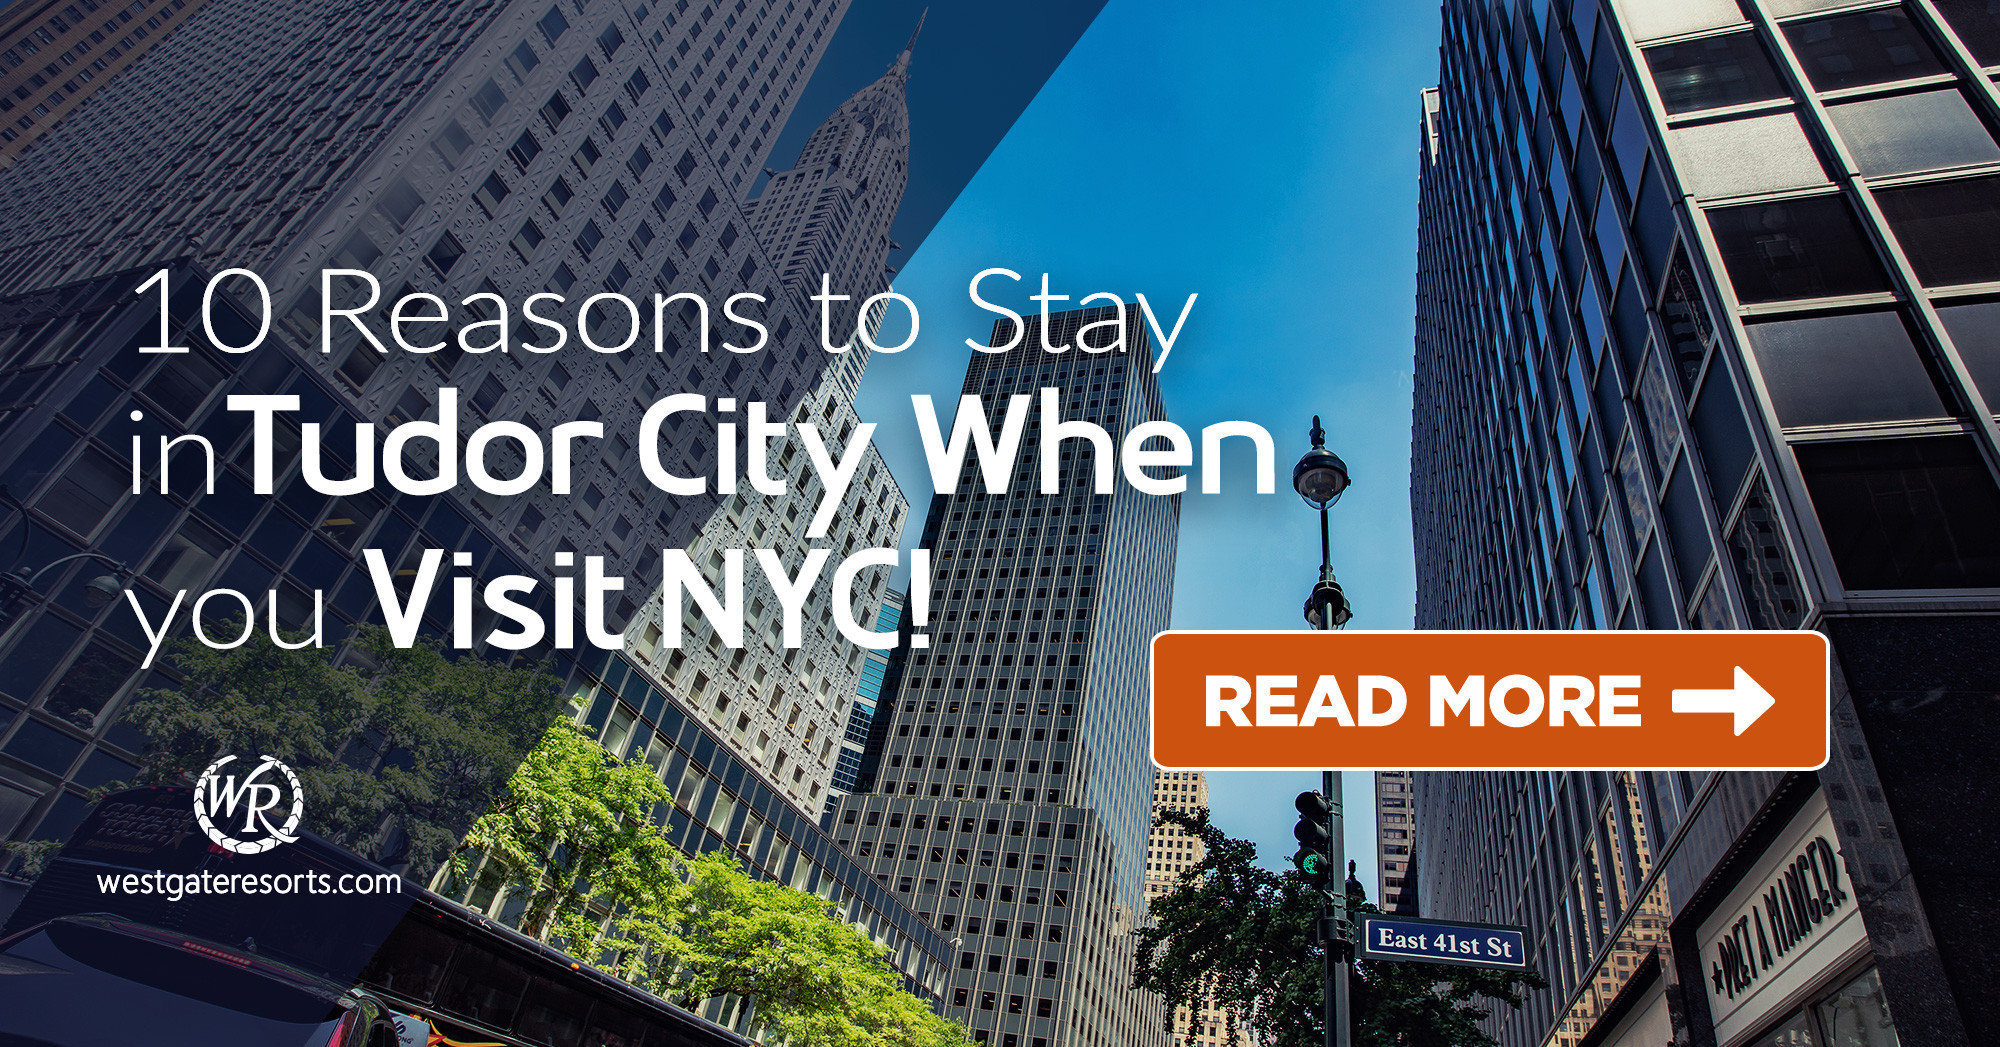 10 Reasons to Stay in Tudor City When You Visit NYC!